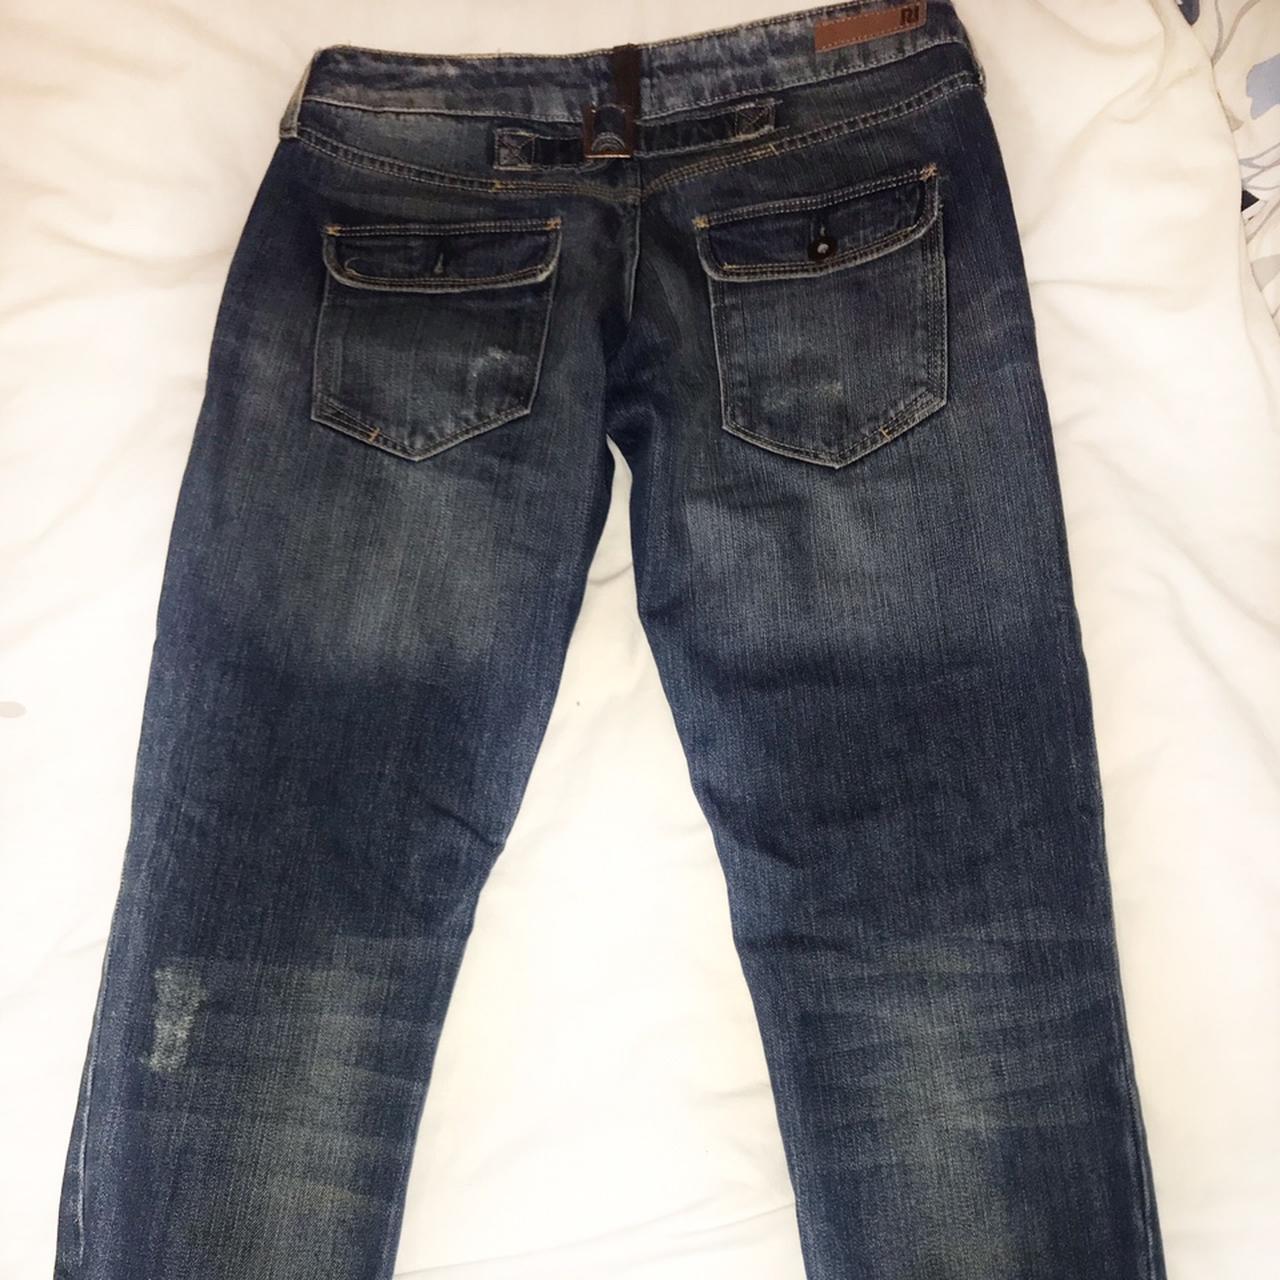 Low waisted denim jean from river island. Only wore... - Depop